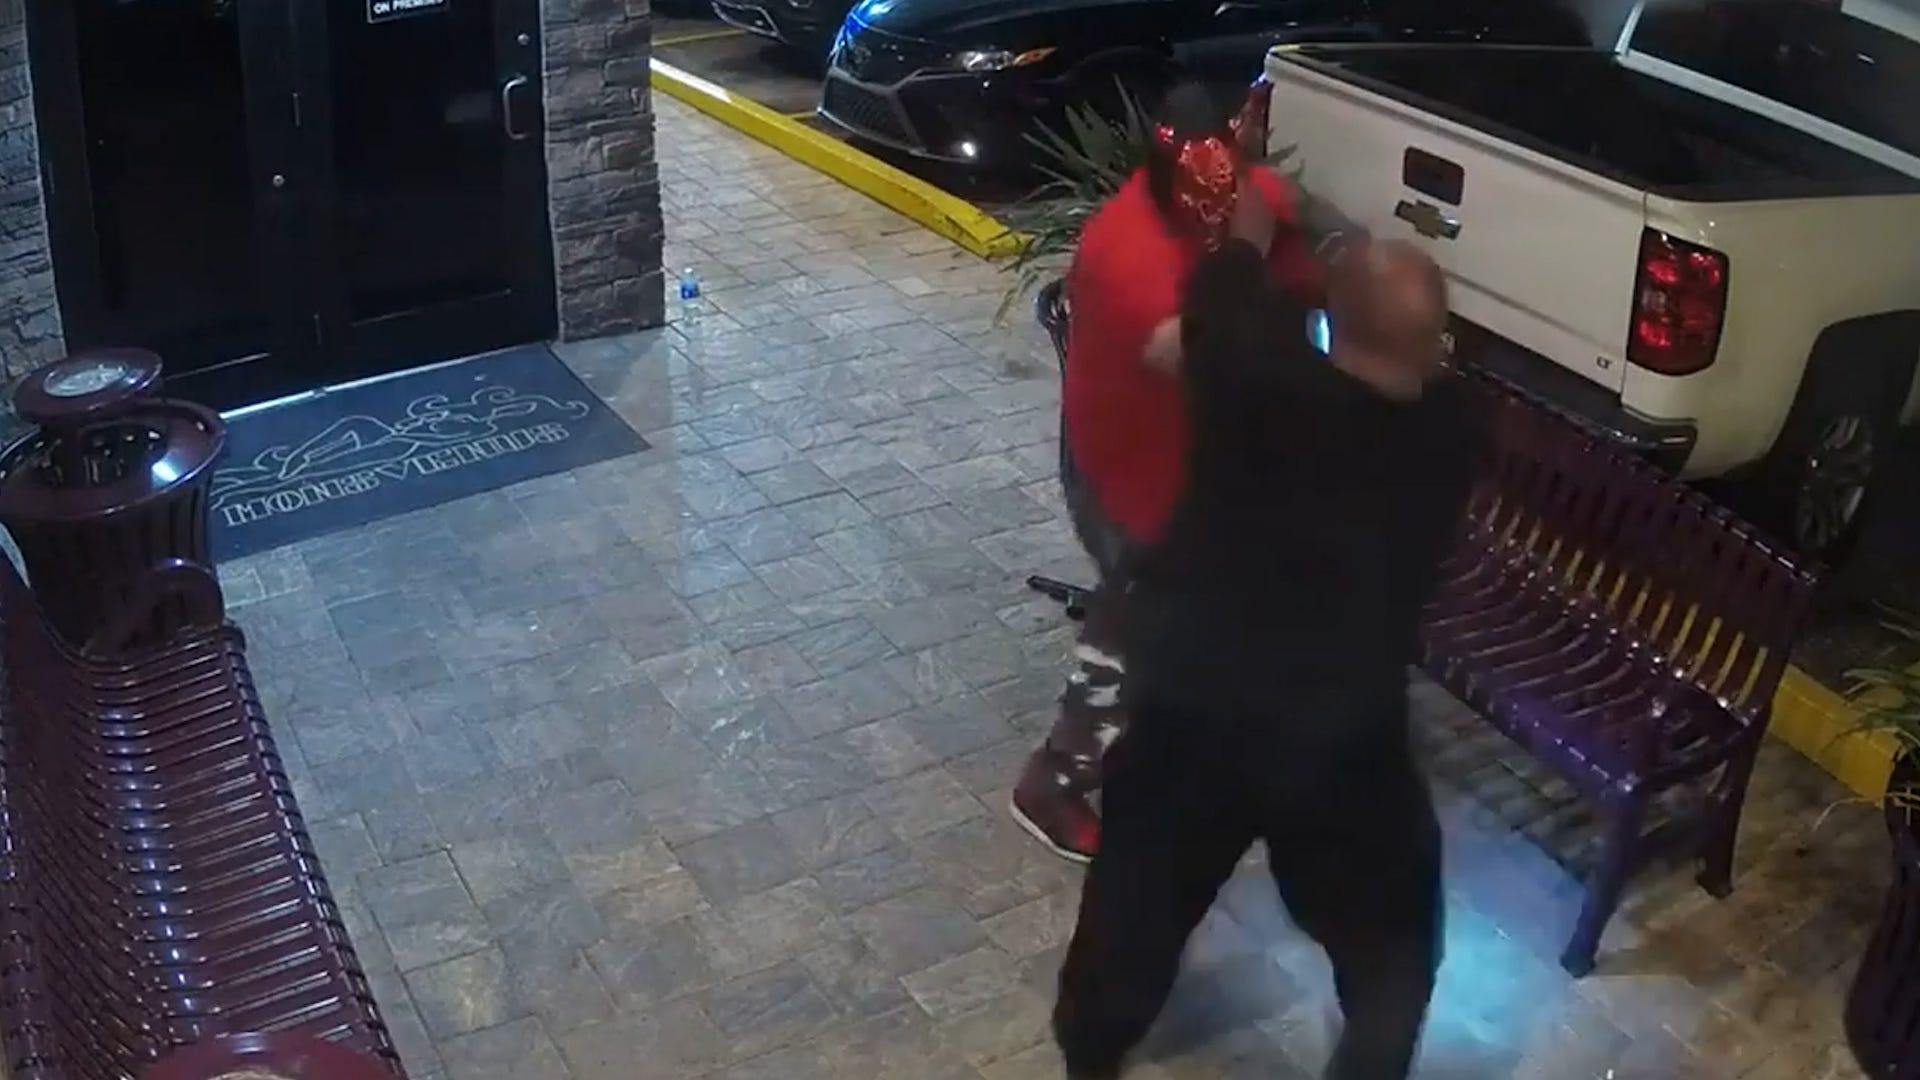 Strip club bouncers in Florida tackle masked man entering bar with gun in hand